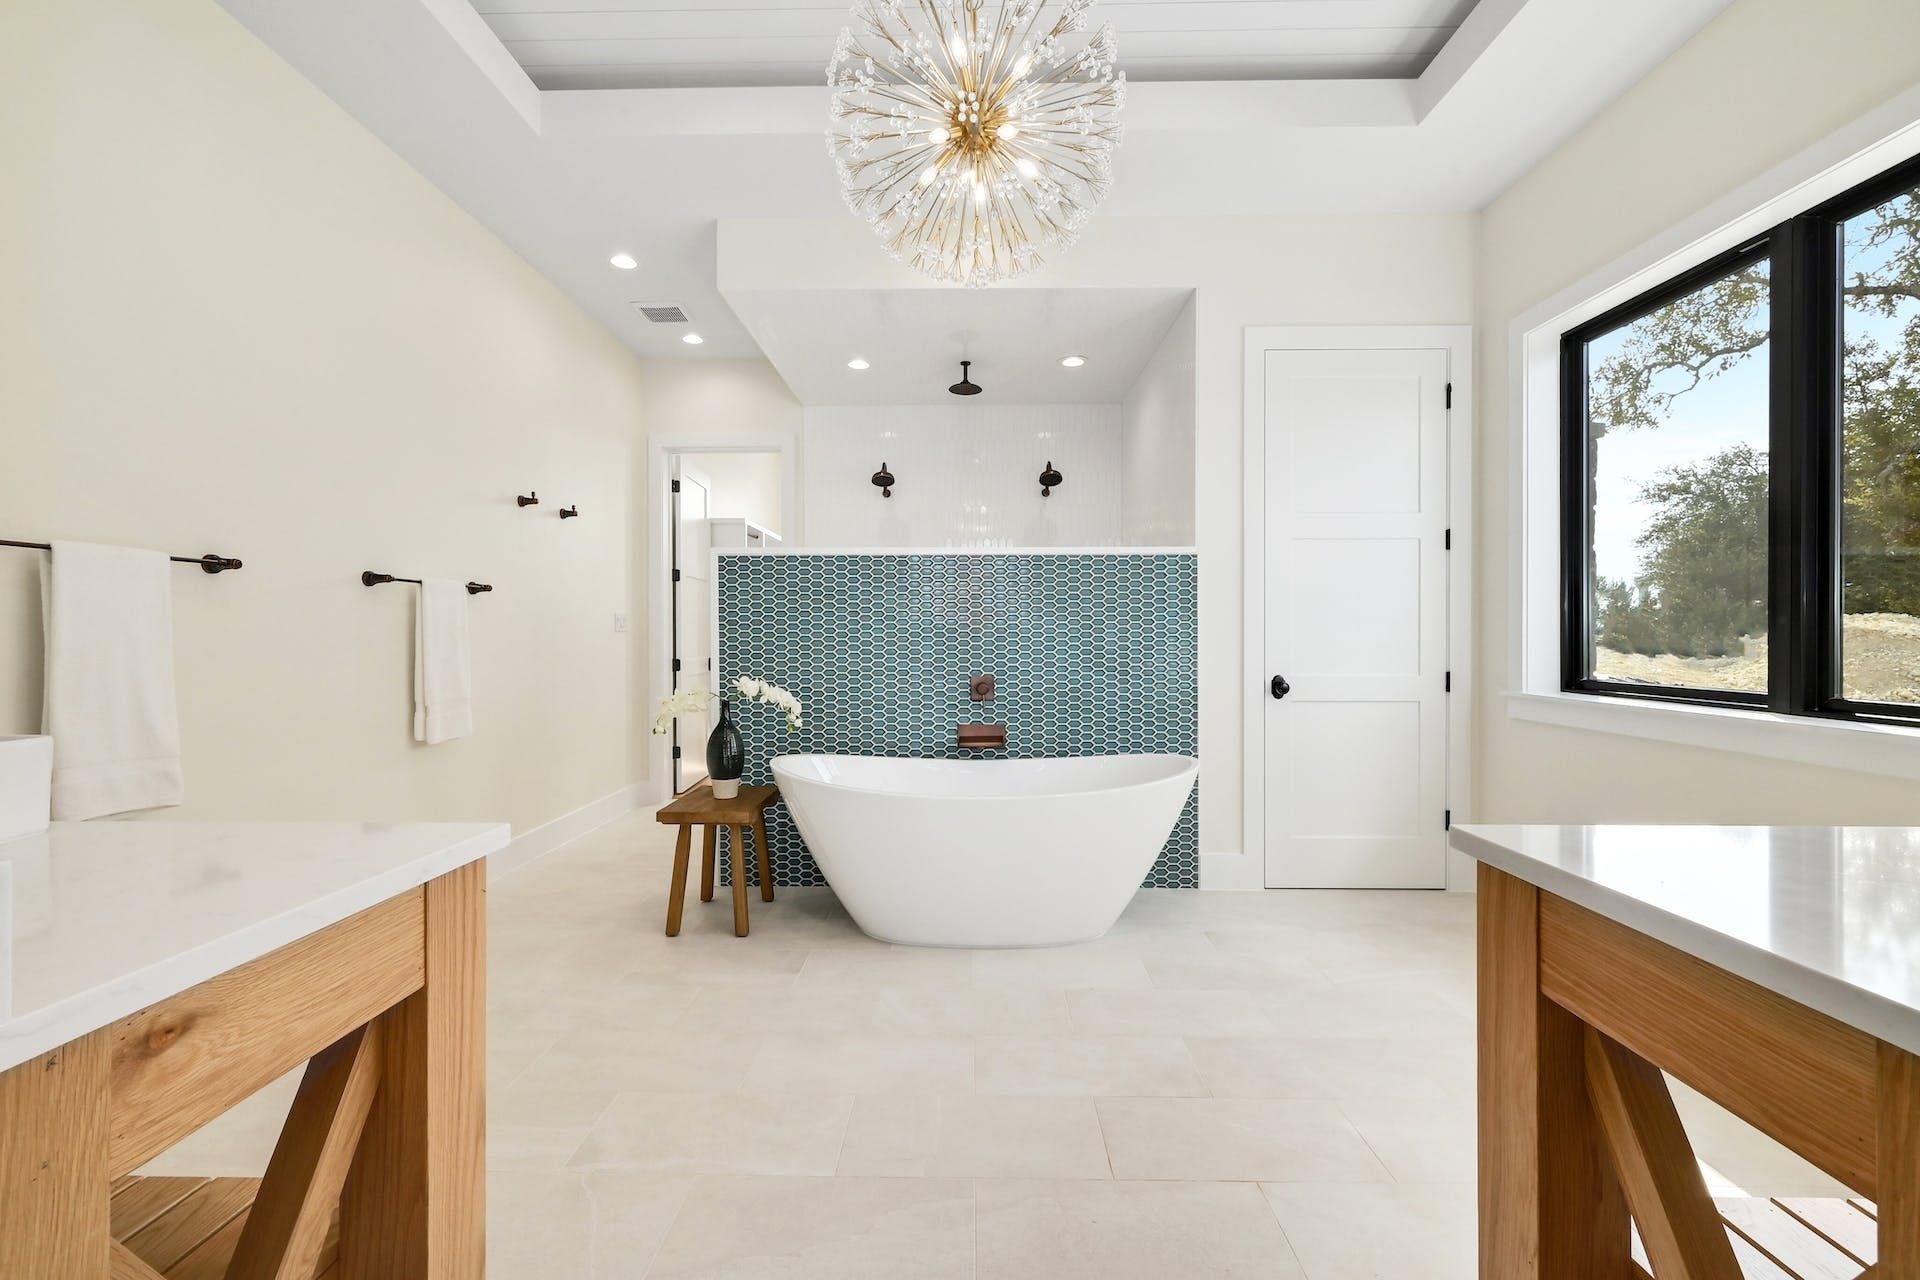 White soaking tub against blue tile and chandelier